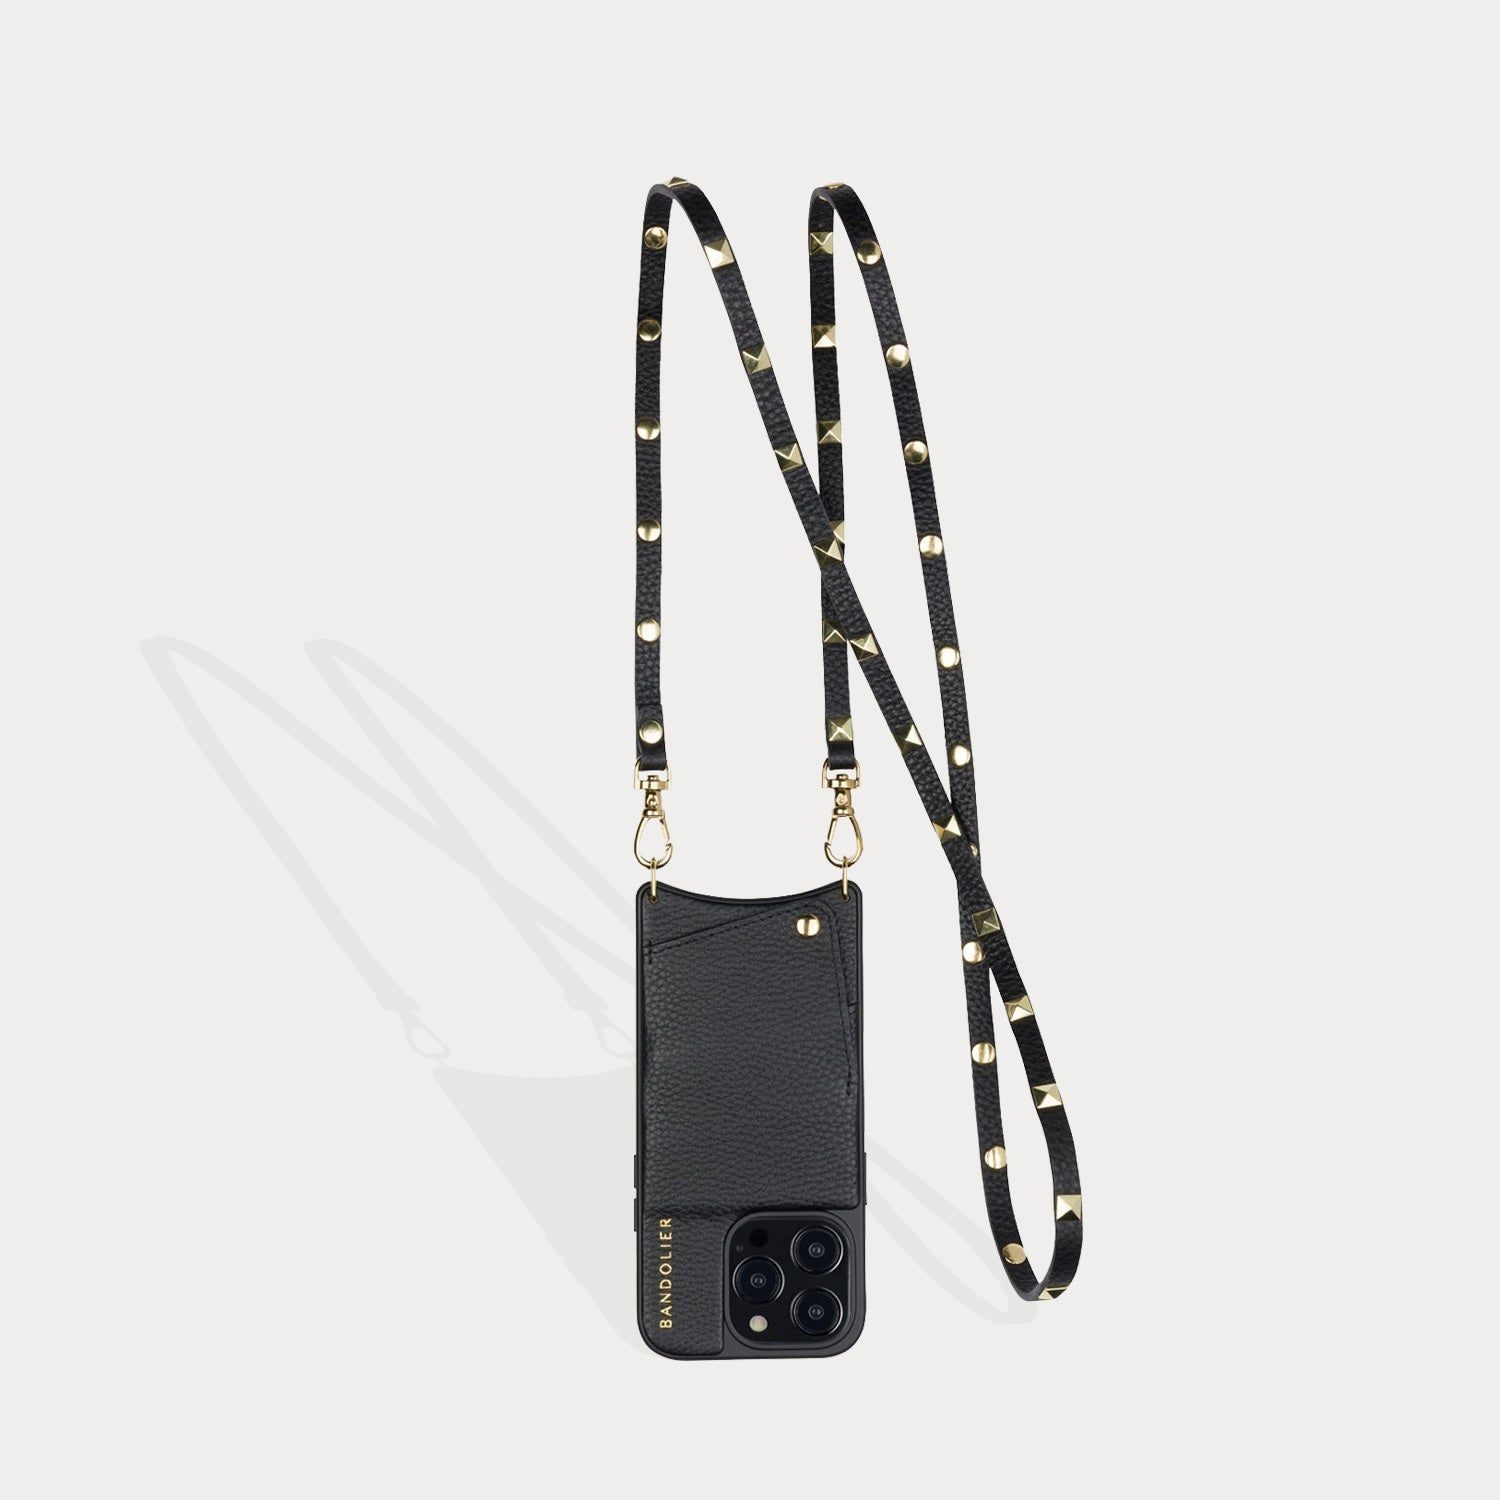  Bandolier Expanded Zip Pouch - Black/Gold - Phone Case